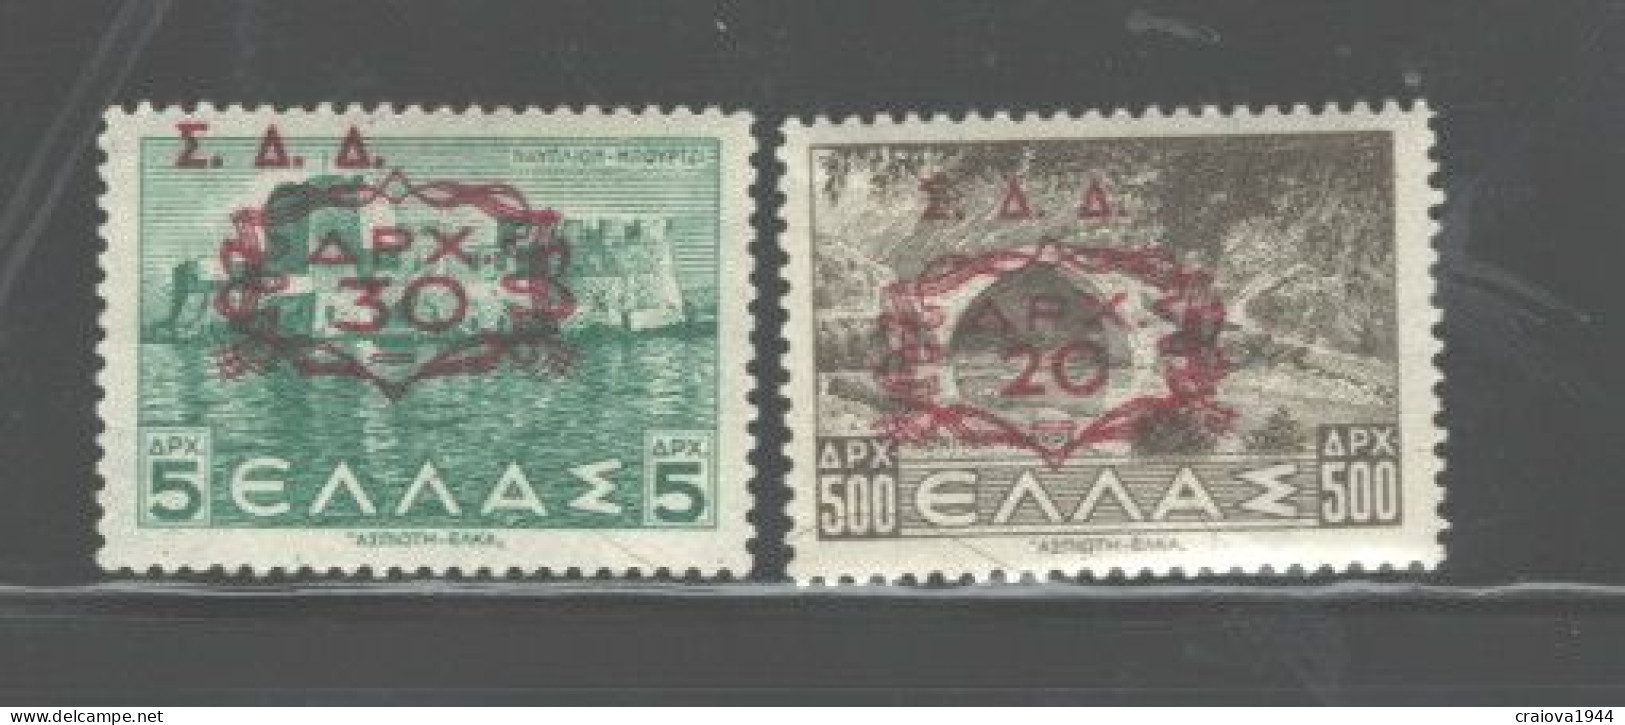 GREECE STAMPS,1947 #N243-N244 OVERPRINT, USED IN DODECANESE ISL. - Dodécanèse